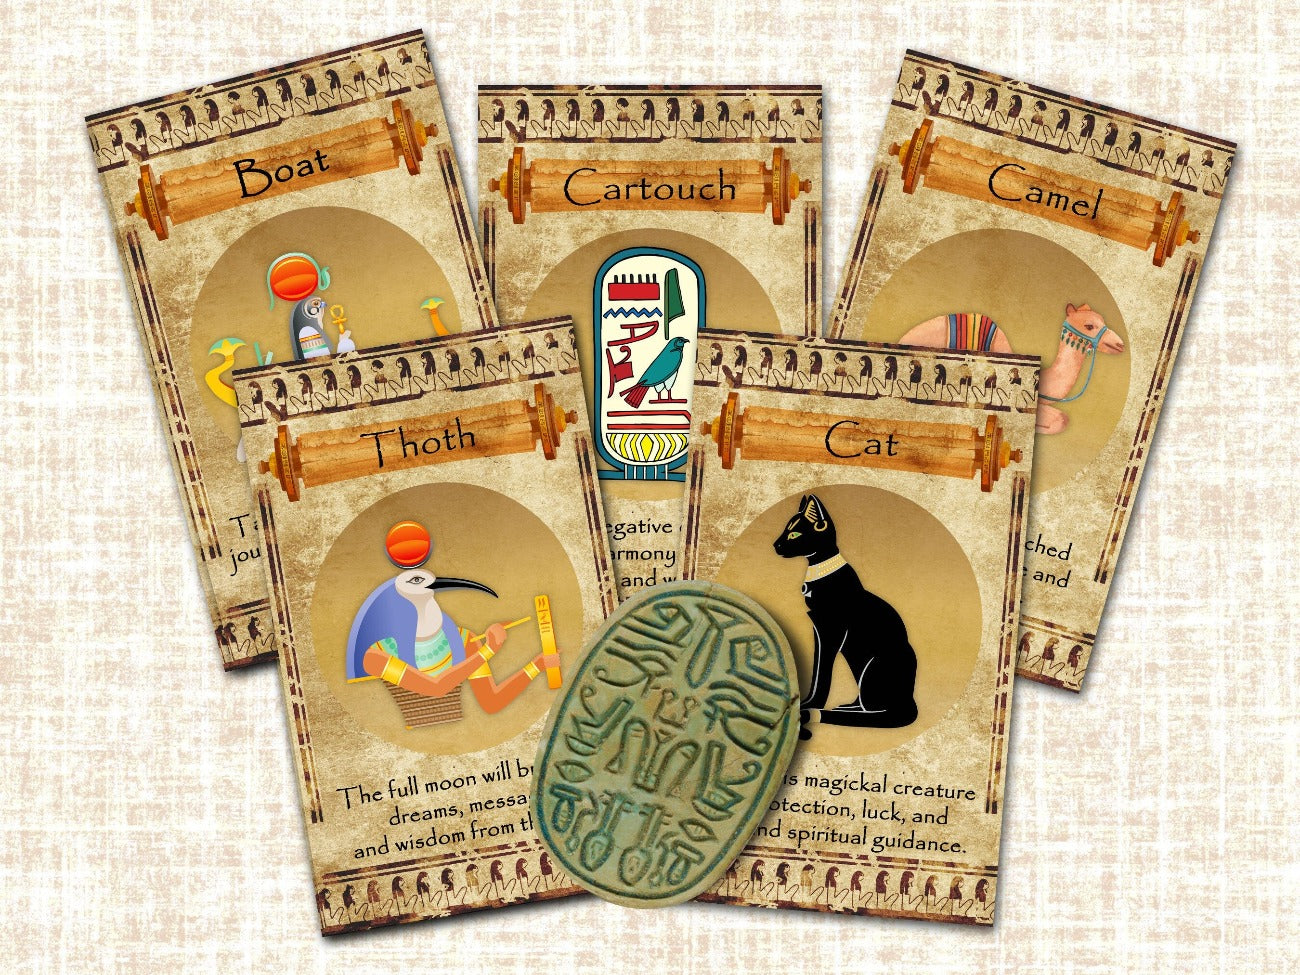 EGYPTIAN ORACLE CARDS Print at Home, Tarot Inspirational Deck, Isis, Bast, Hathor, Thoth, Witchcraft Messages from the Divine Spirit, Egypt - Morgana Magick Spell